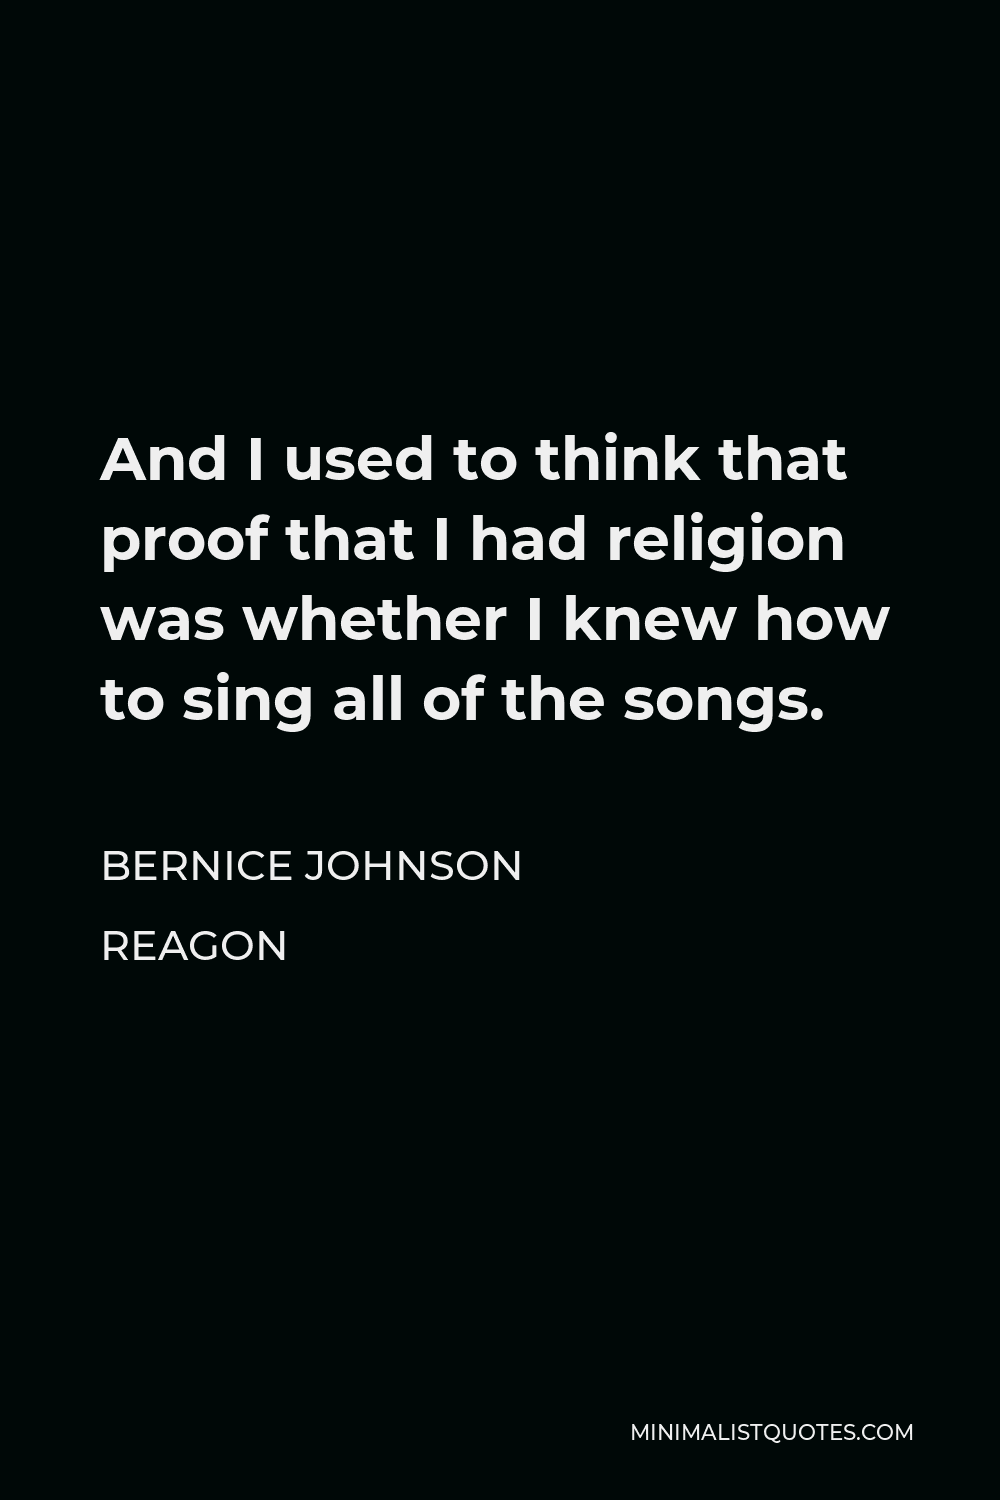 Bernice Johnson Reagon Quote - And I used to think that proof that I had religion was whether I knew how to sing all of the songs.